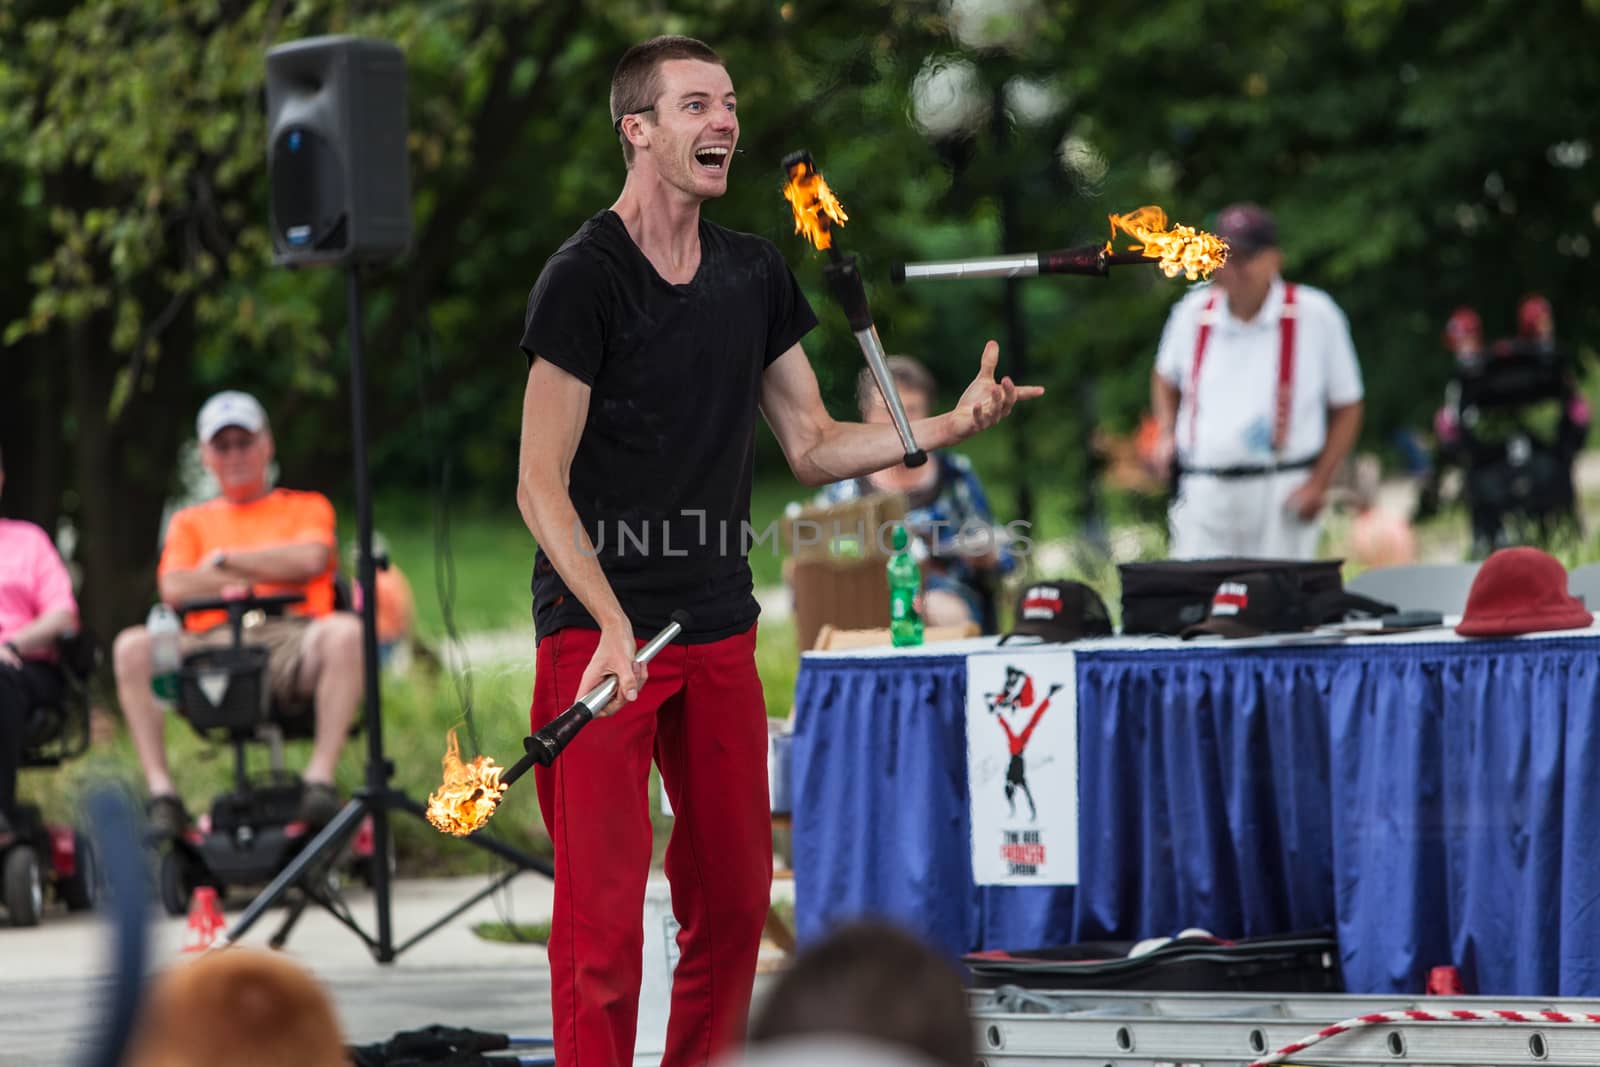 DES MOINES, IA /USA - AUGUST 10: Red Trouser Show juggler Tobin Renwick at the Iowa State Fair on August 10, 2014 in Des Moines, Iowa, USA.